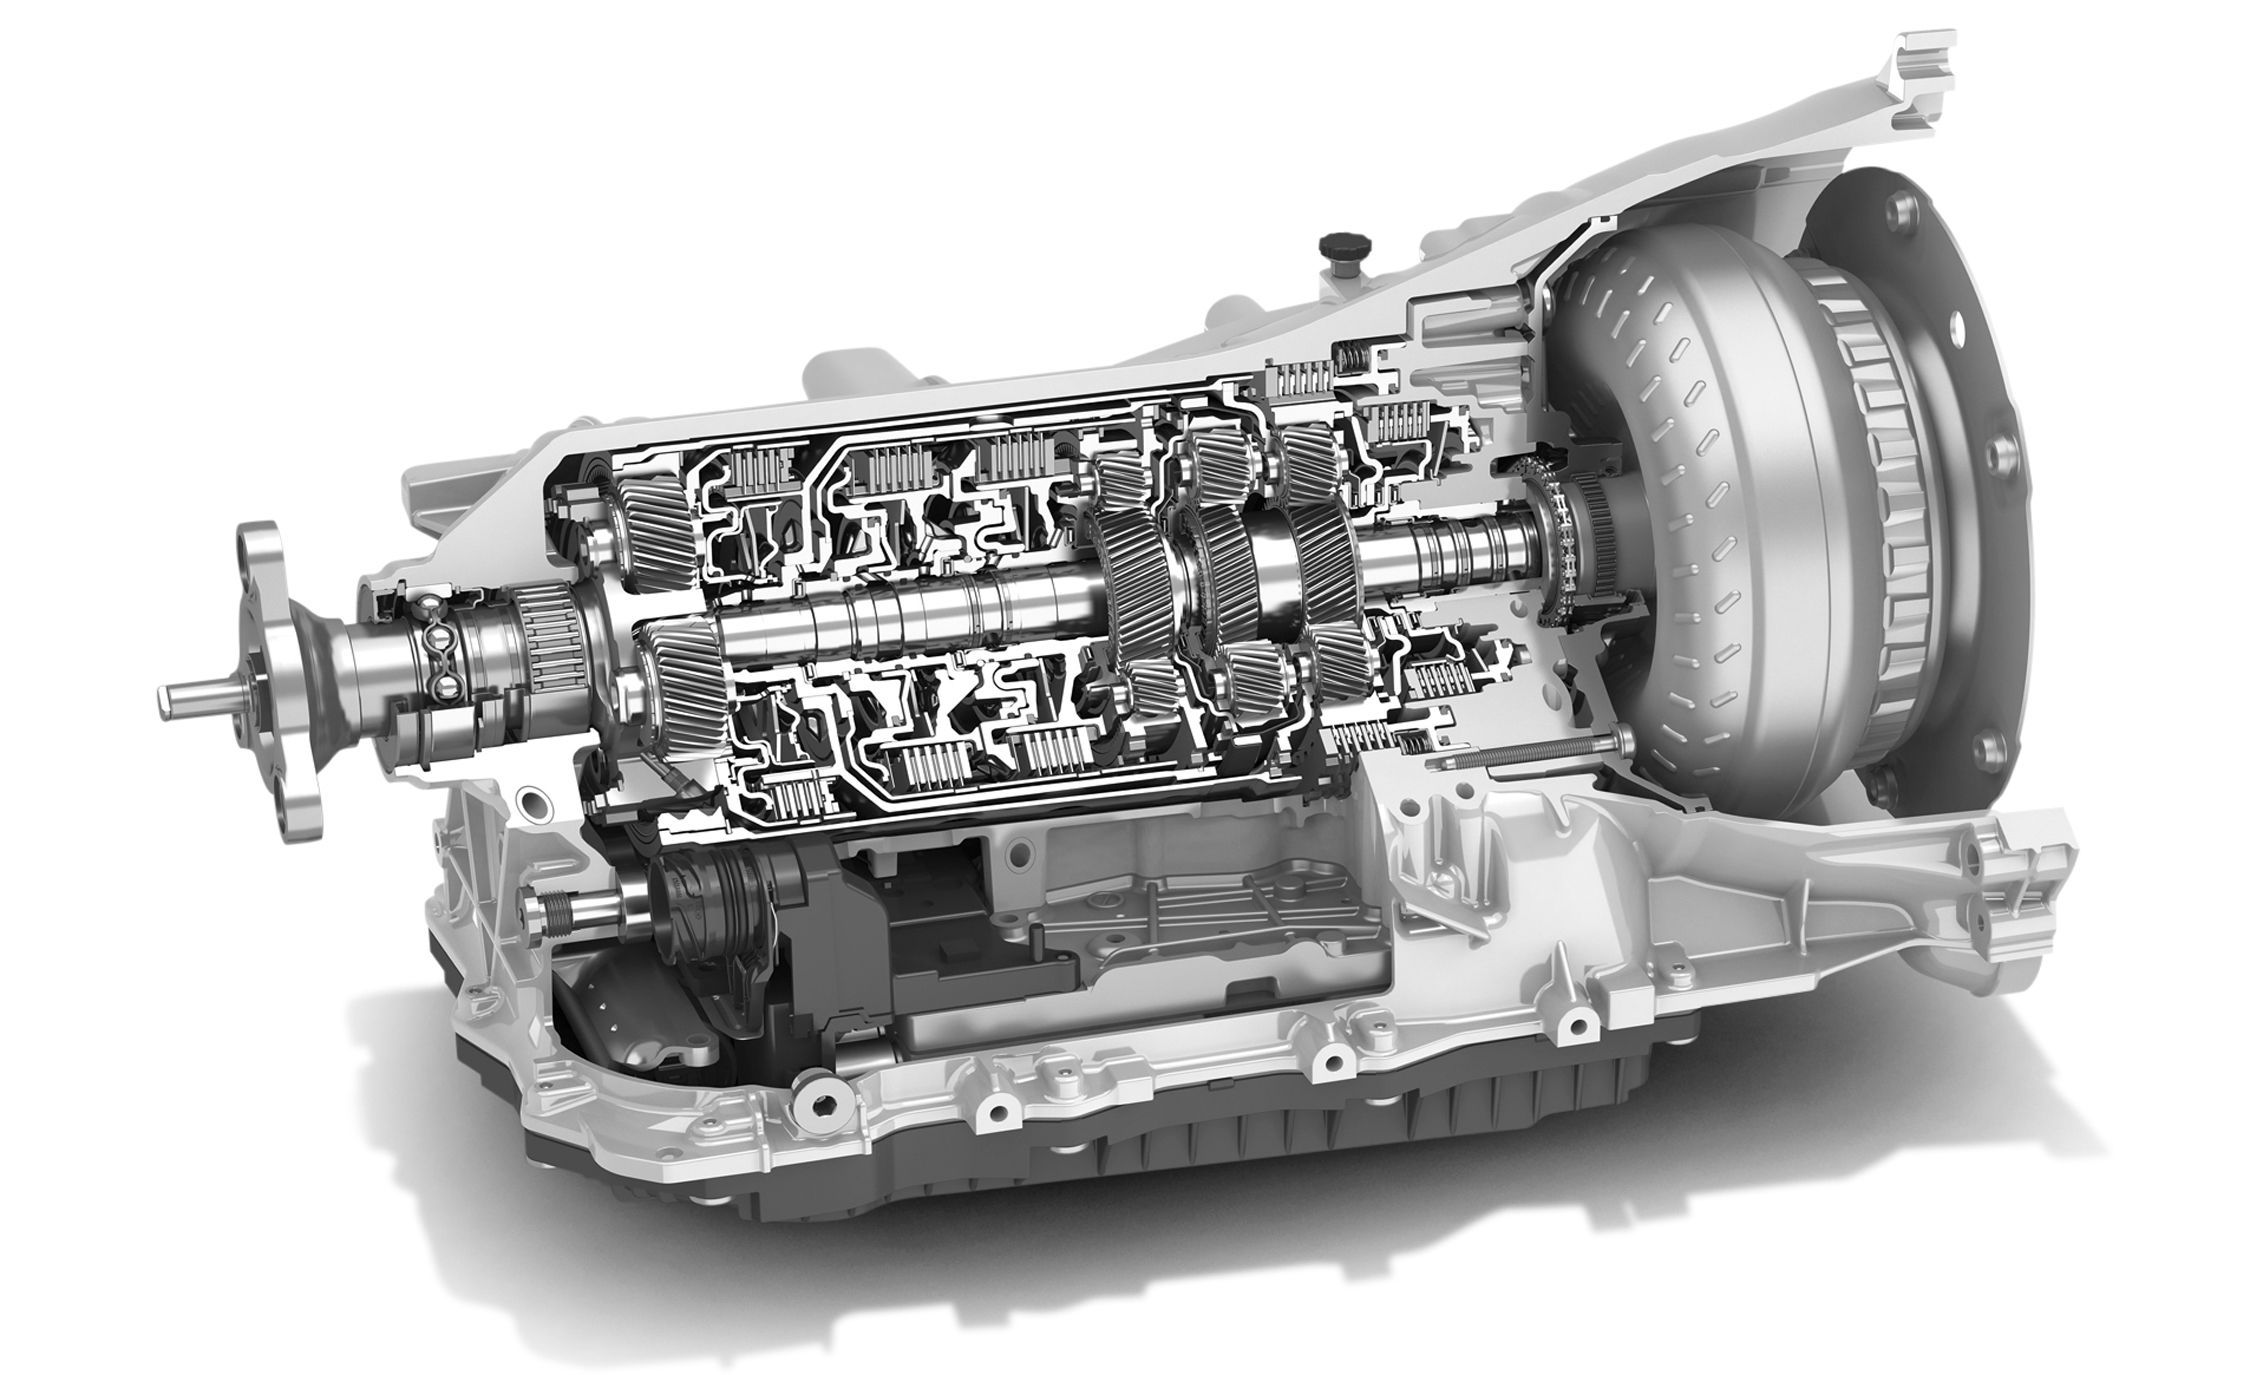 which company makes the best gearbox for the money